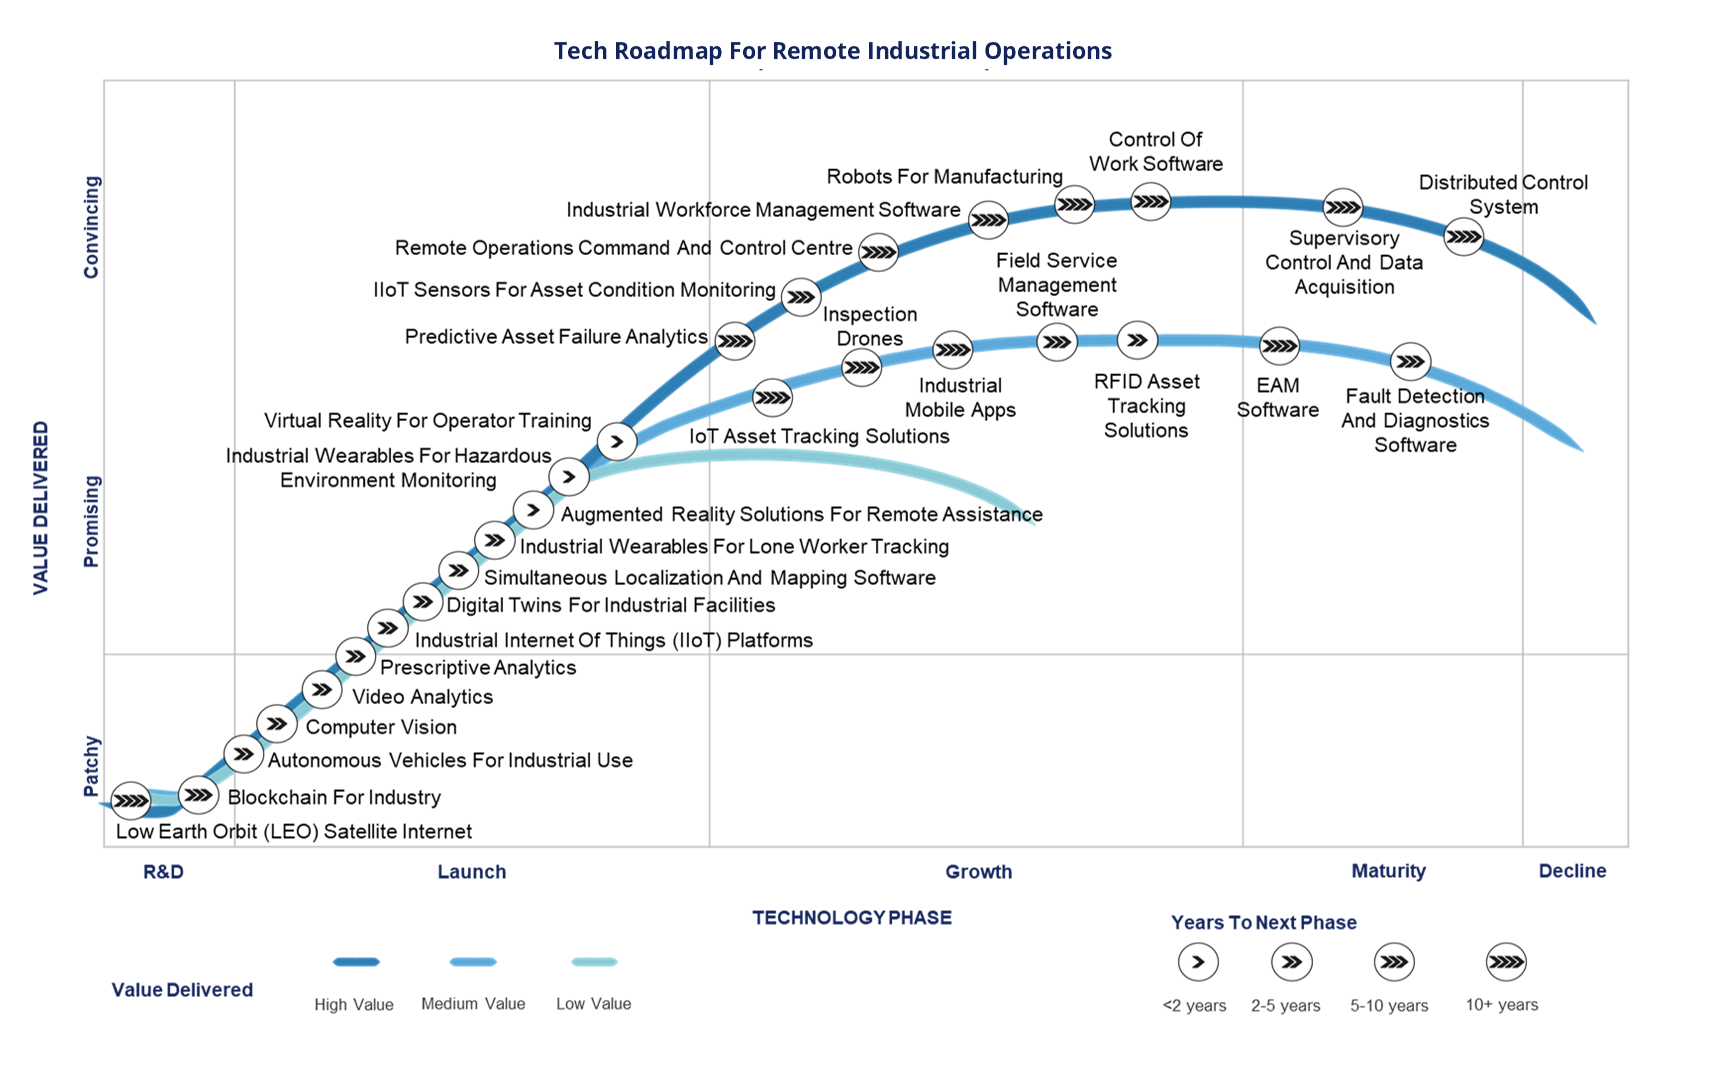 Tech Roadmap For Remote Industrial Operations: Your Compass To Point You In The Right Direction